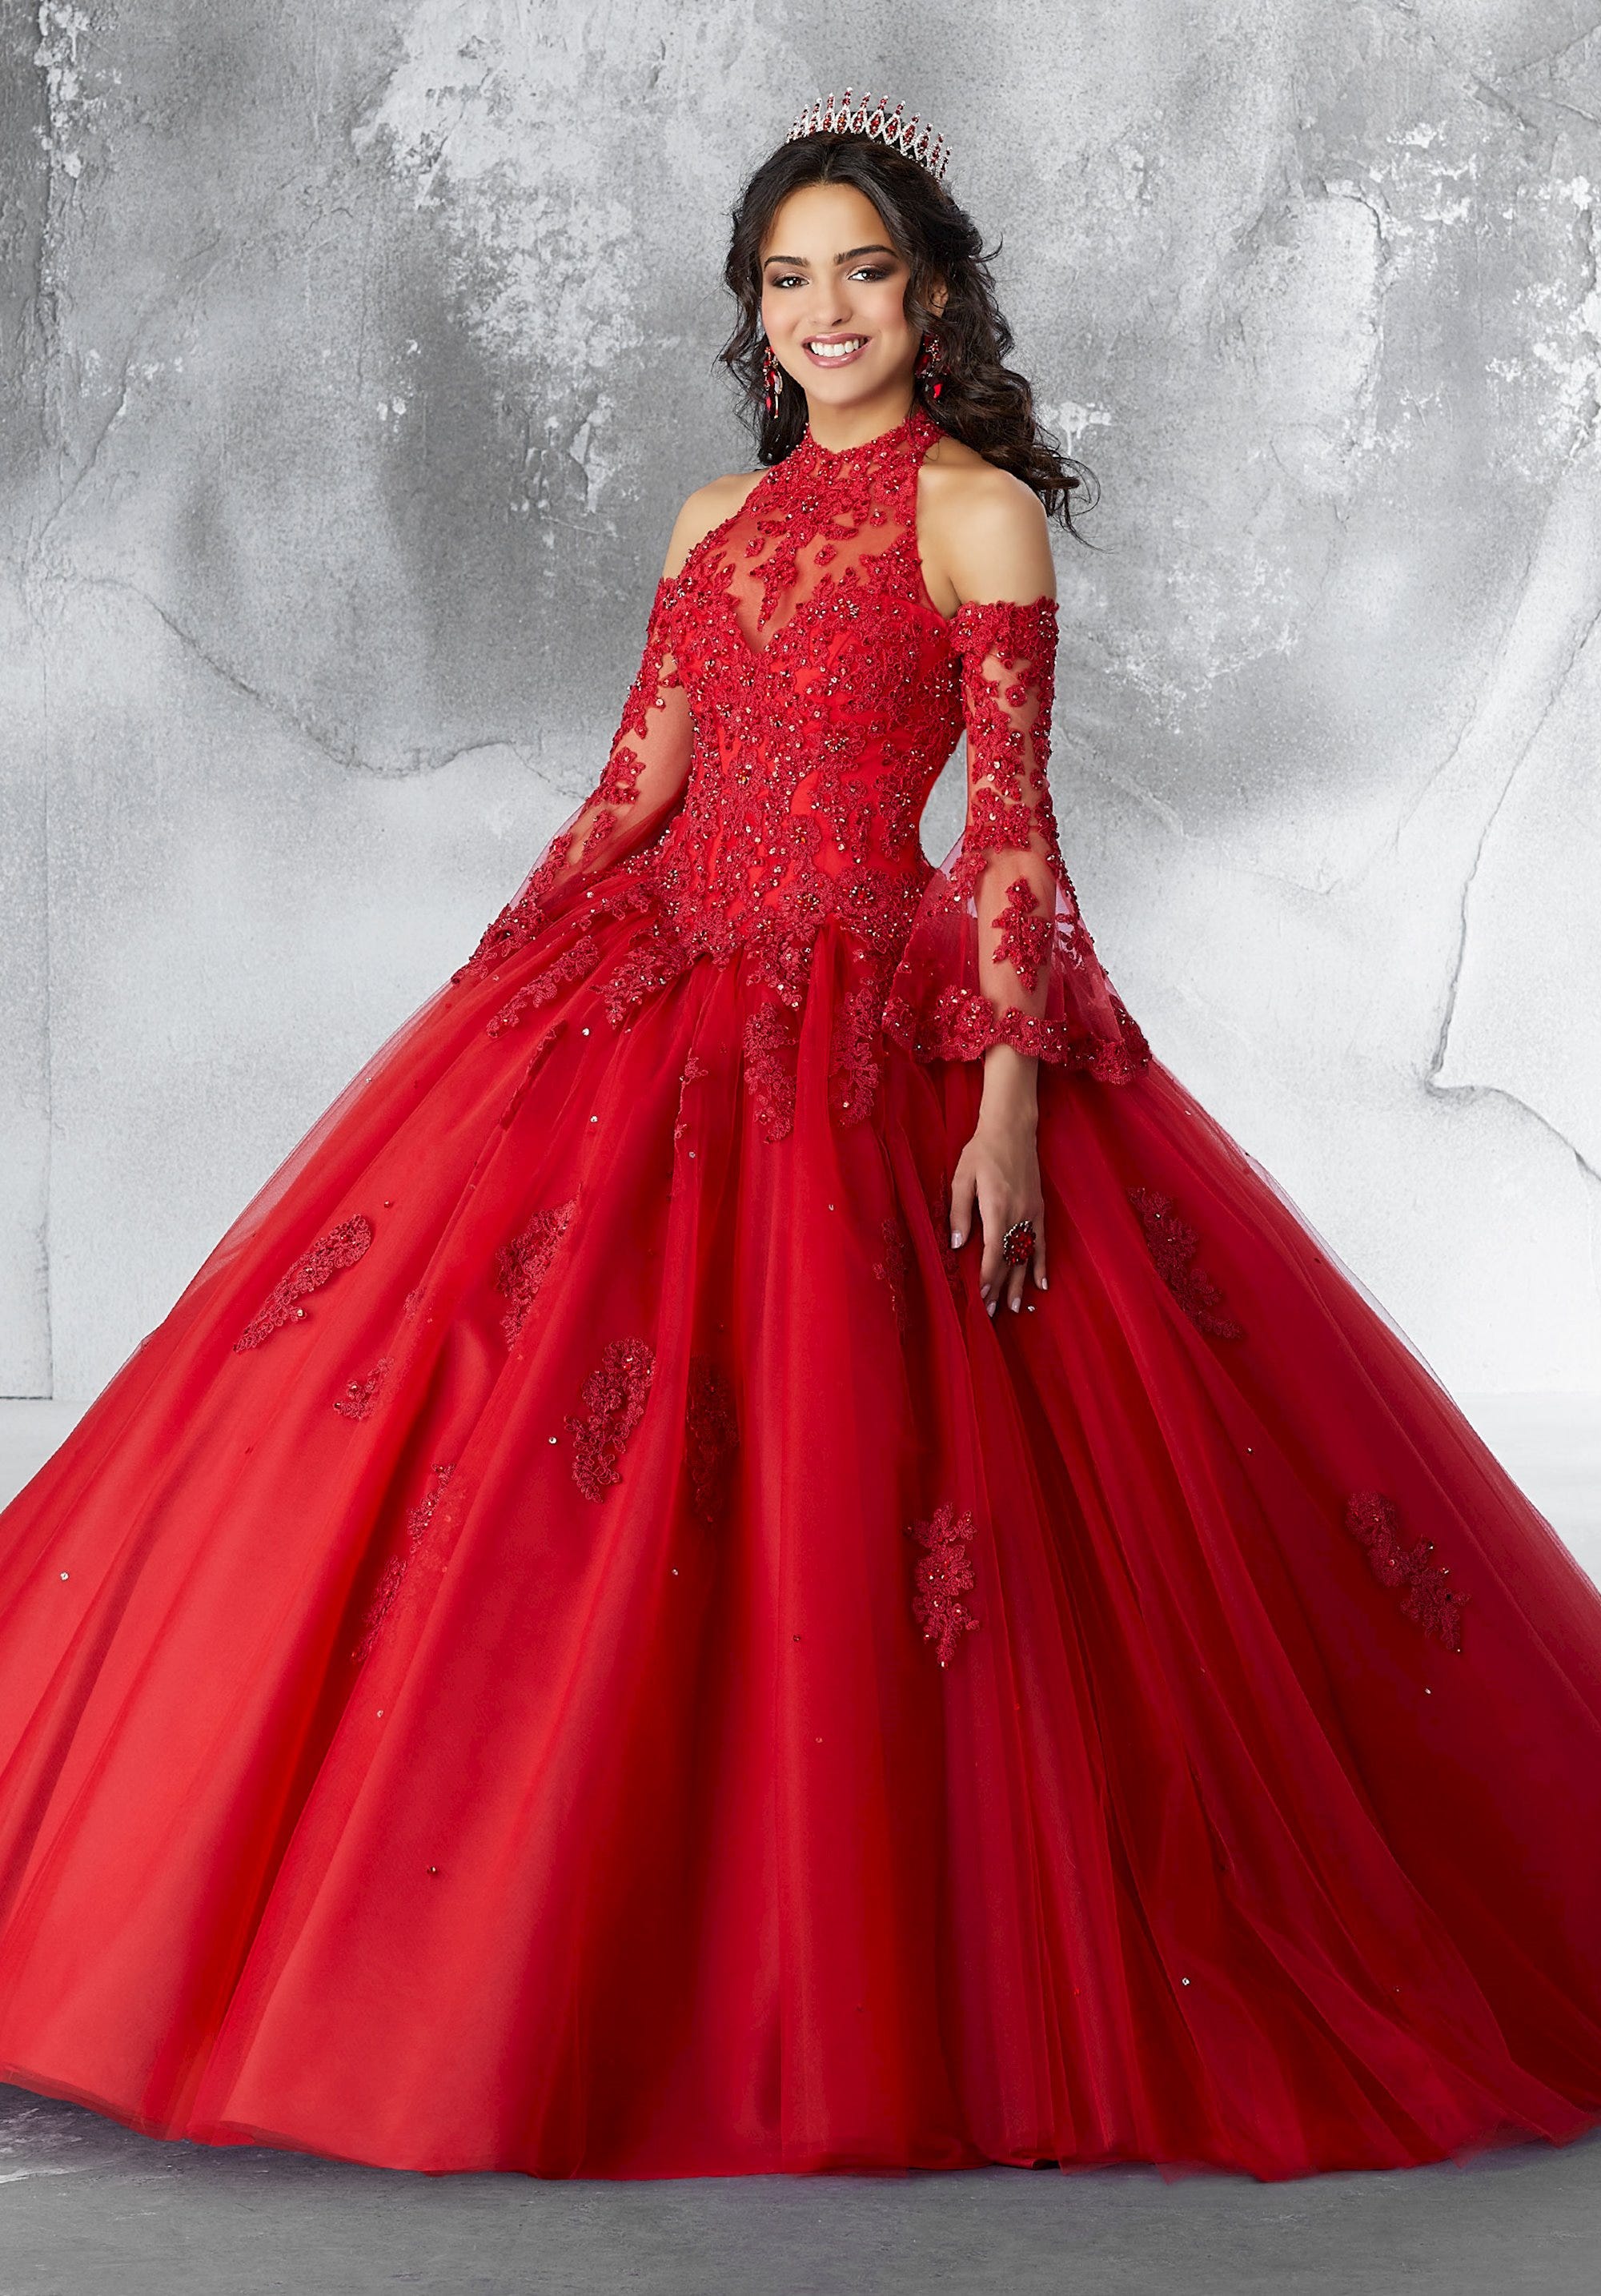 most beautiful gown dress